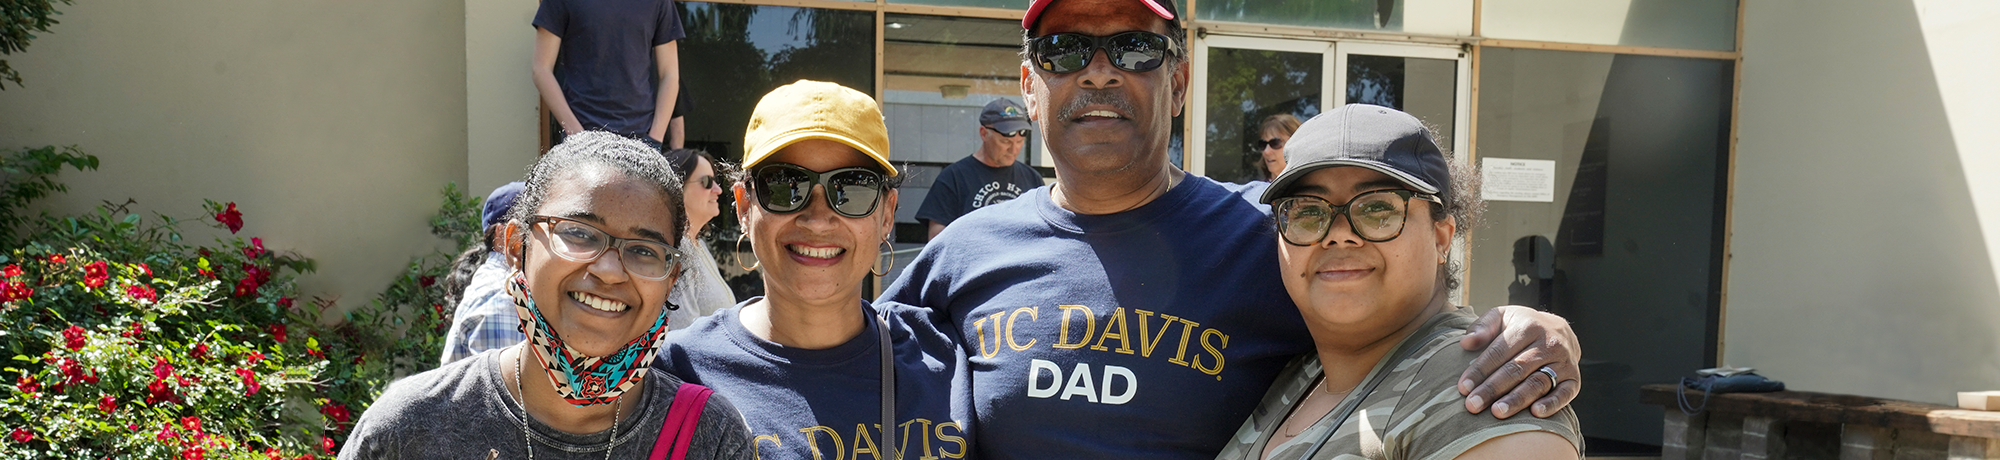 UC Davis family posing, mom, dad, and two daughters, posing for a picture together. Mom's shirt says "UC Davis Mom" and dad's shirt days "UC Davis Dad".